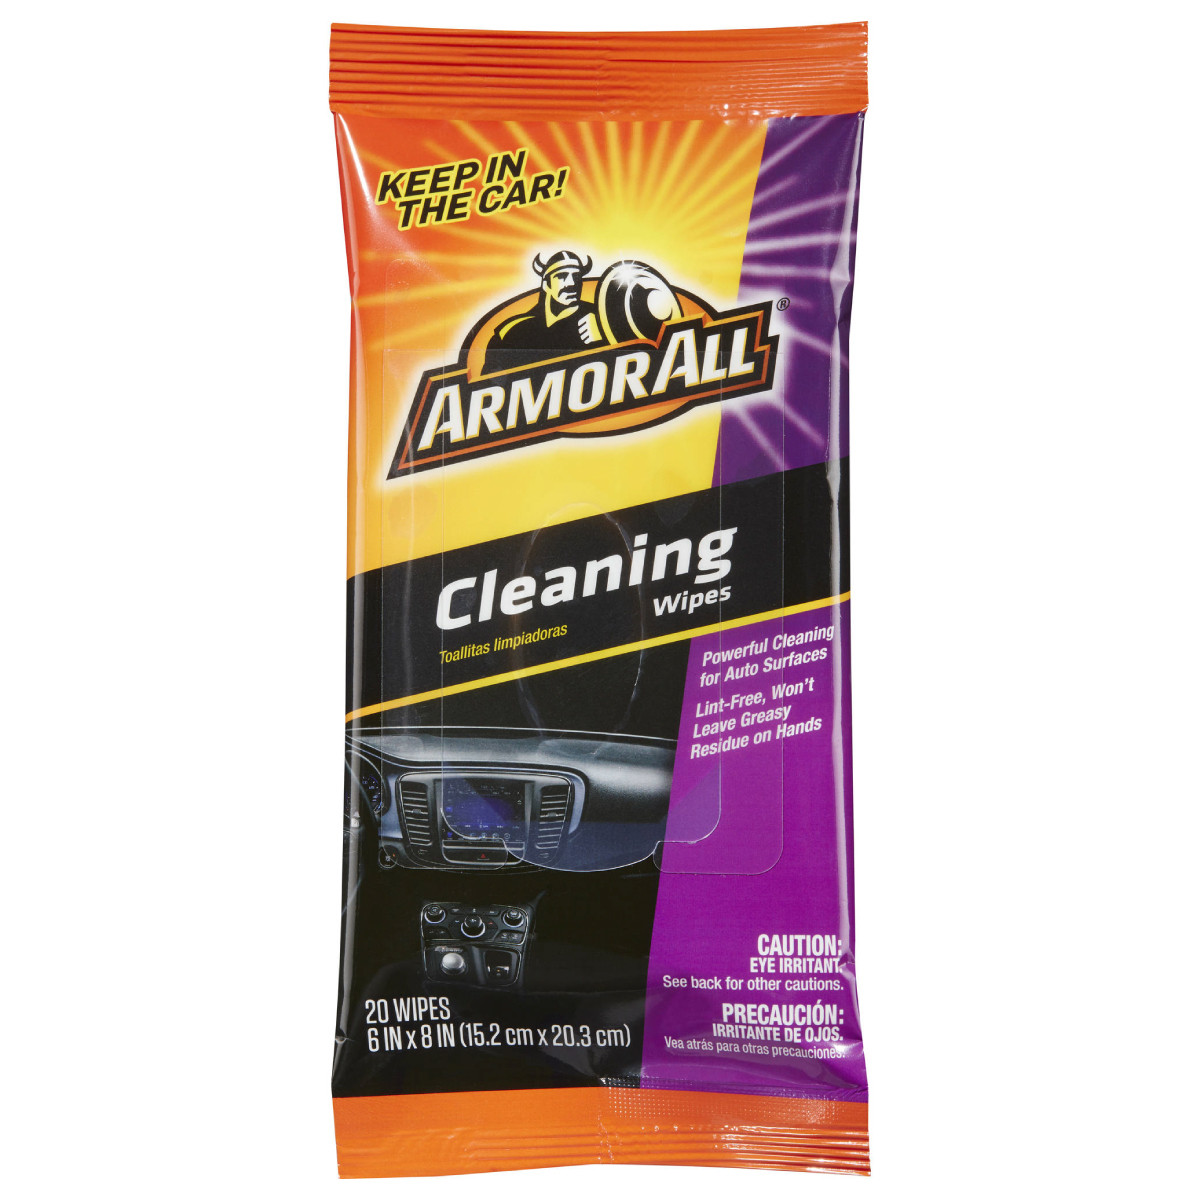 Armor All Cleaning Wipes